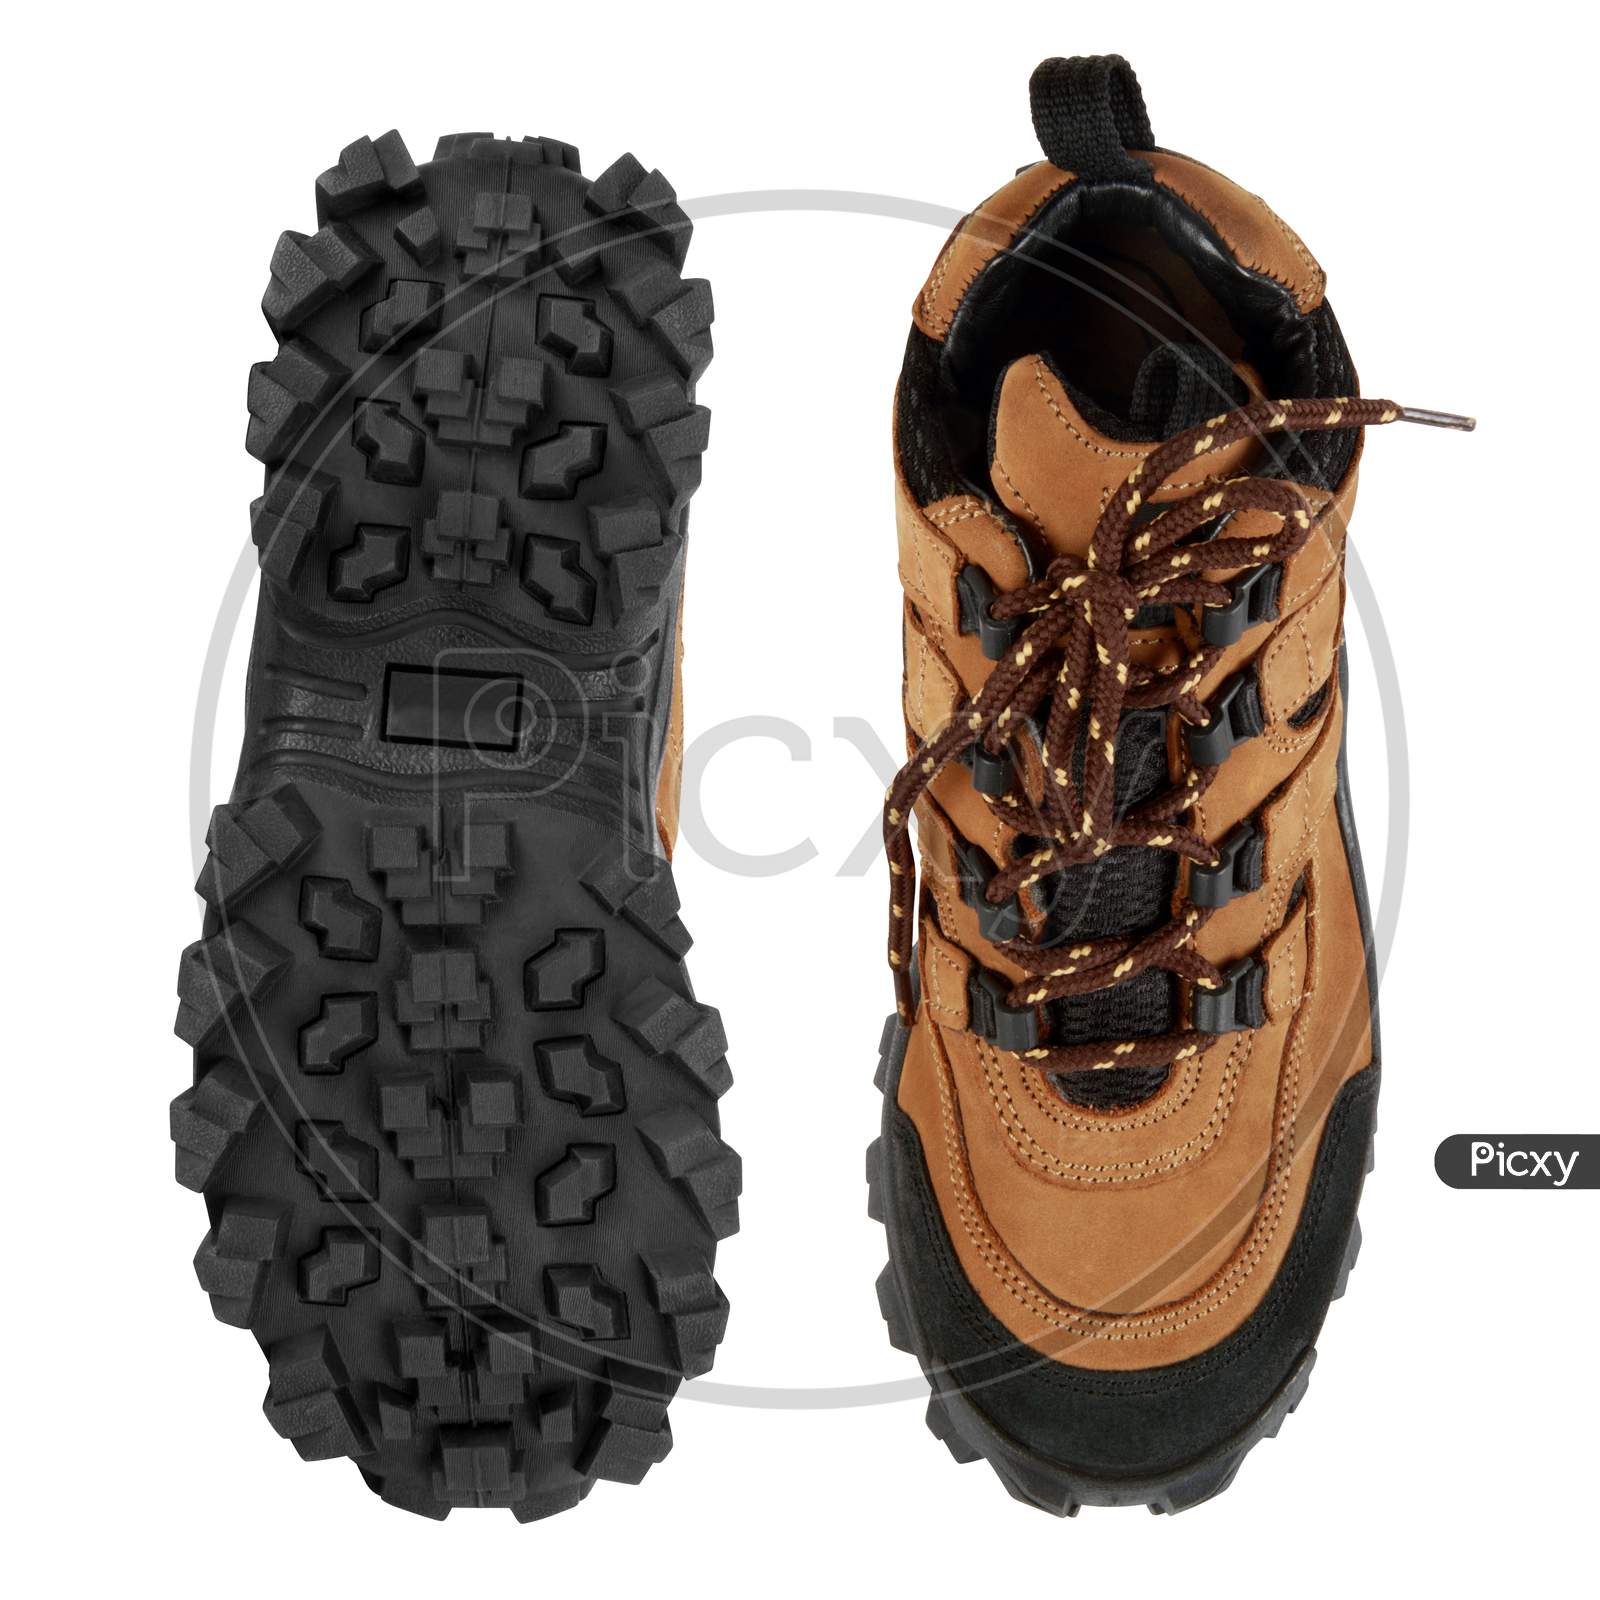 Tough Hiking Shoes And Sole